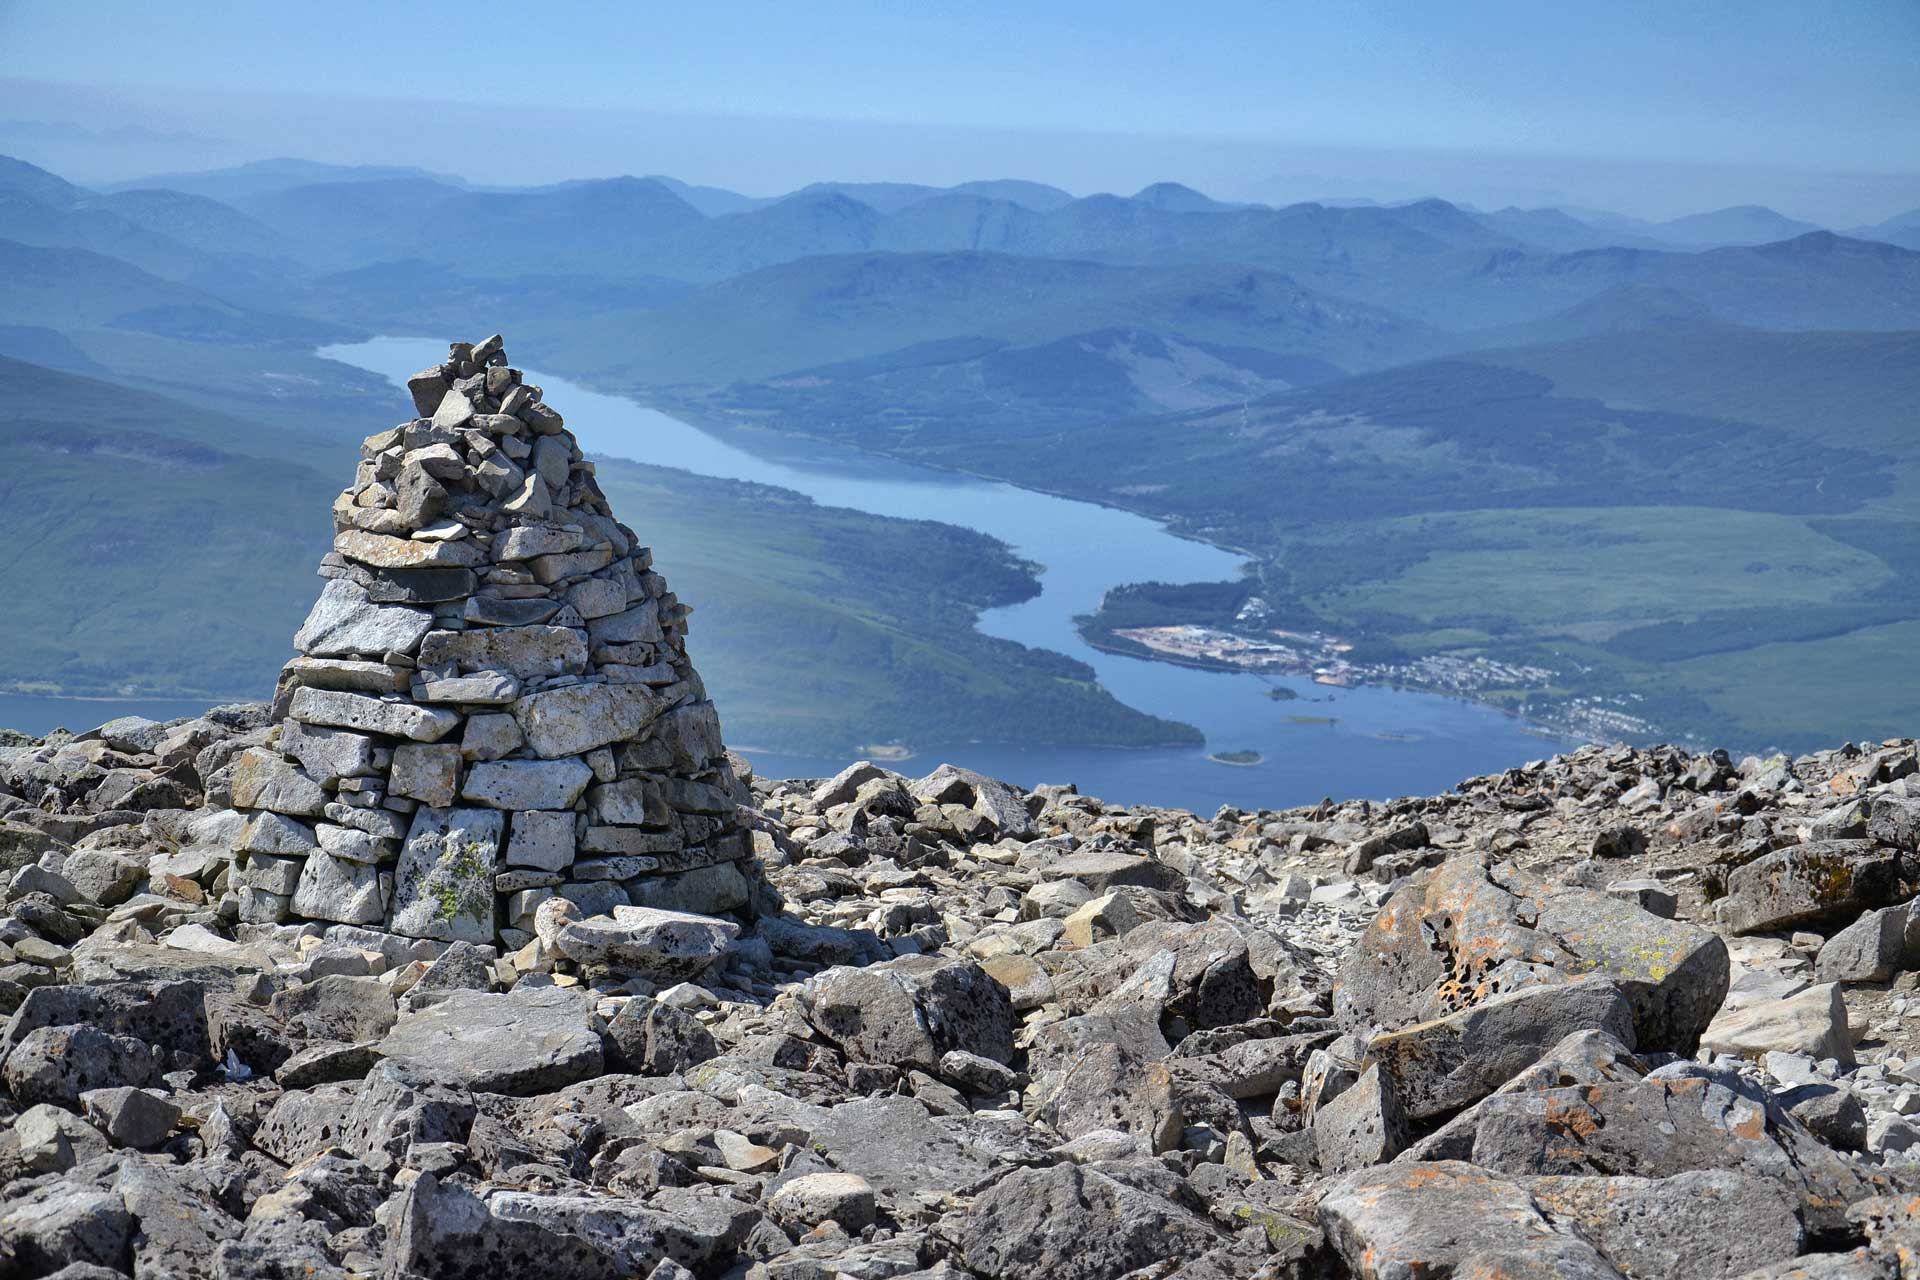 Climb Ben Nevis when you come and stay at Glencoe Hideaways